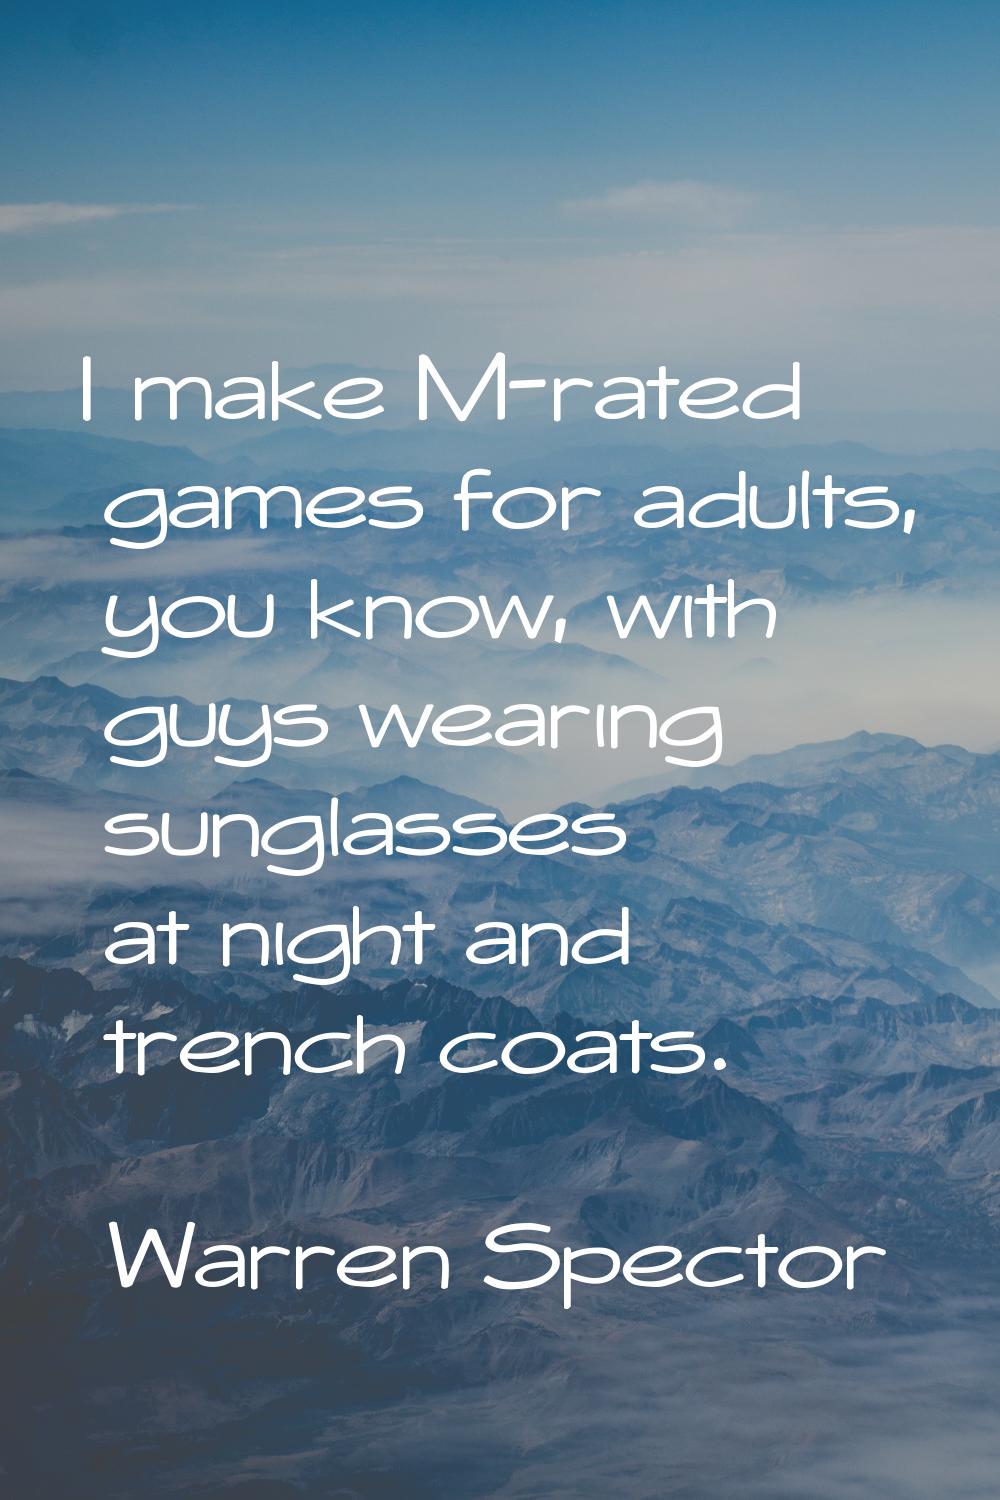 I make M-rated games for adults, you know, with guys wearing sunglasses at night and trench coats.